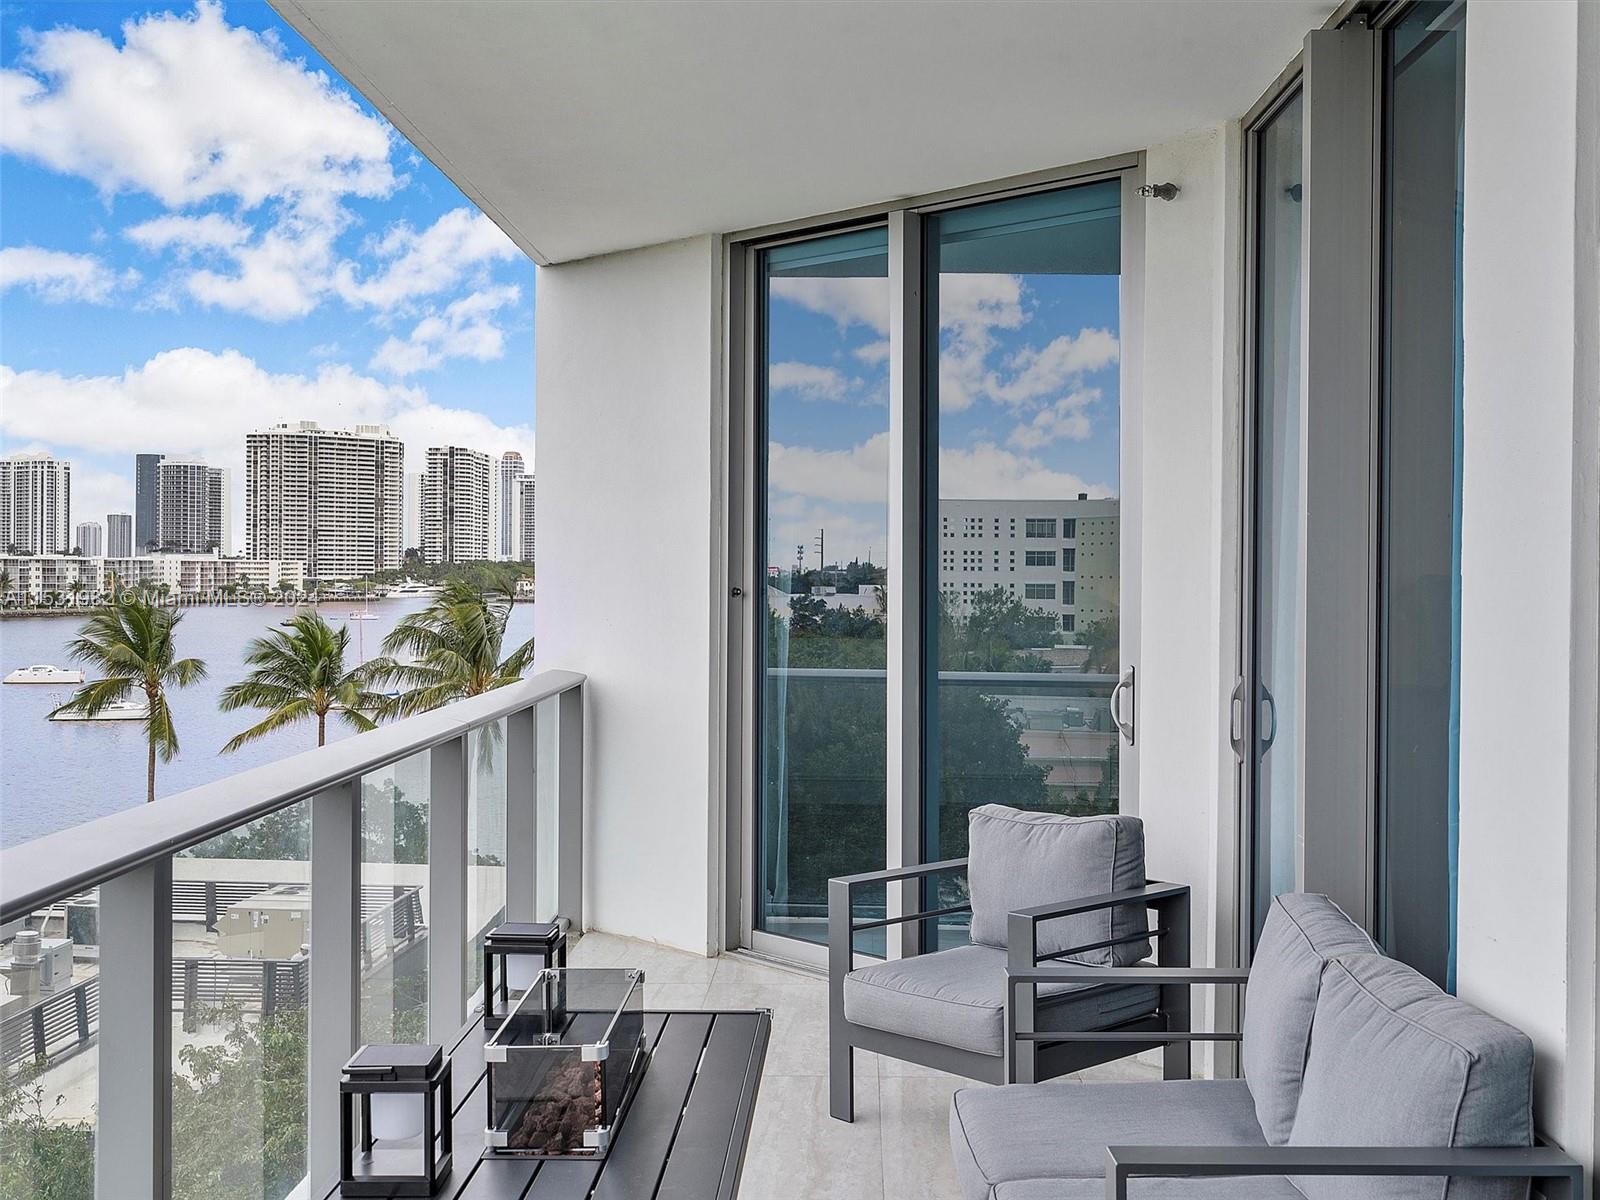 Enjoy the luxury living at Marina Palms, 3 beds, 3.5 baths plus den. Available for sale as well. Offers 2 assigned covered parking spaces. Enjoy 5 star amenities, complementary
gym classes, full service marina and more. Only 10 minutes to Aventura Mall and Sunny Isles Beach. easy to show, call listing agent